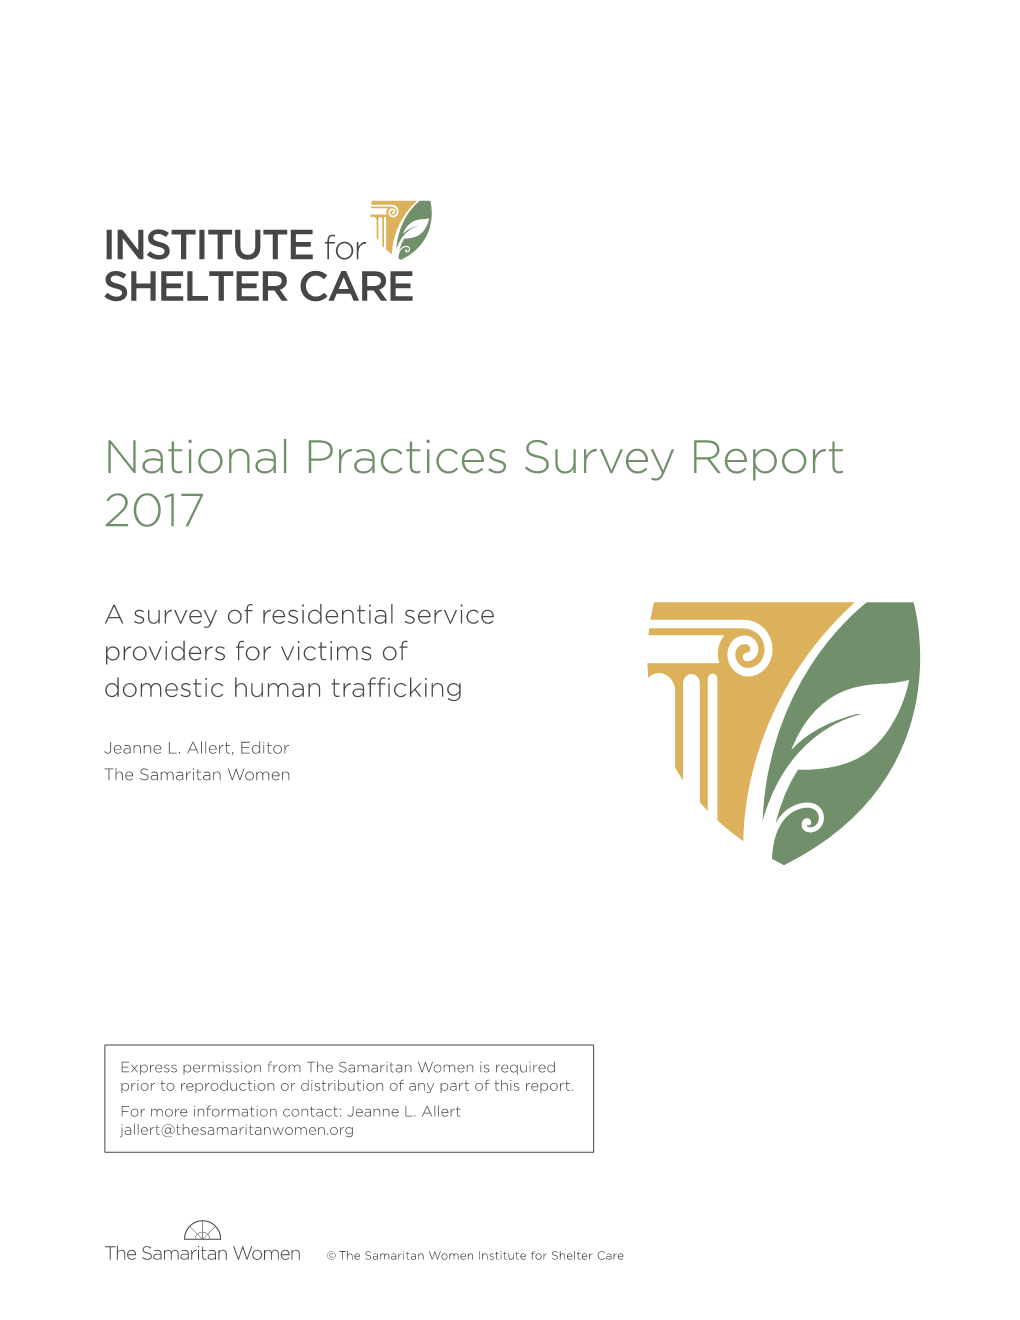 National Practices Survey Report 2017